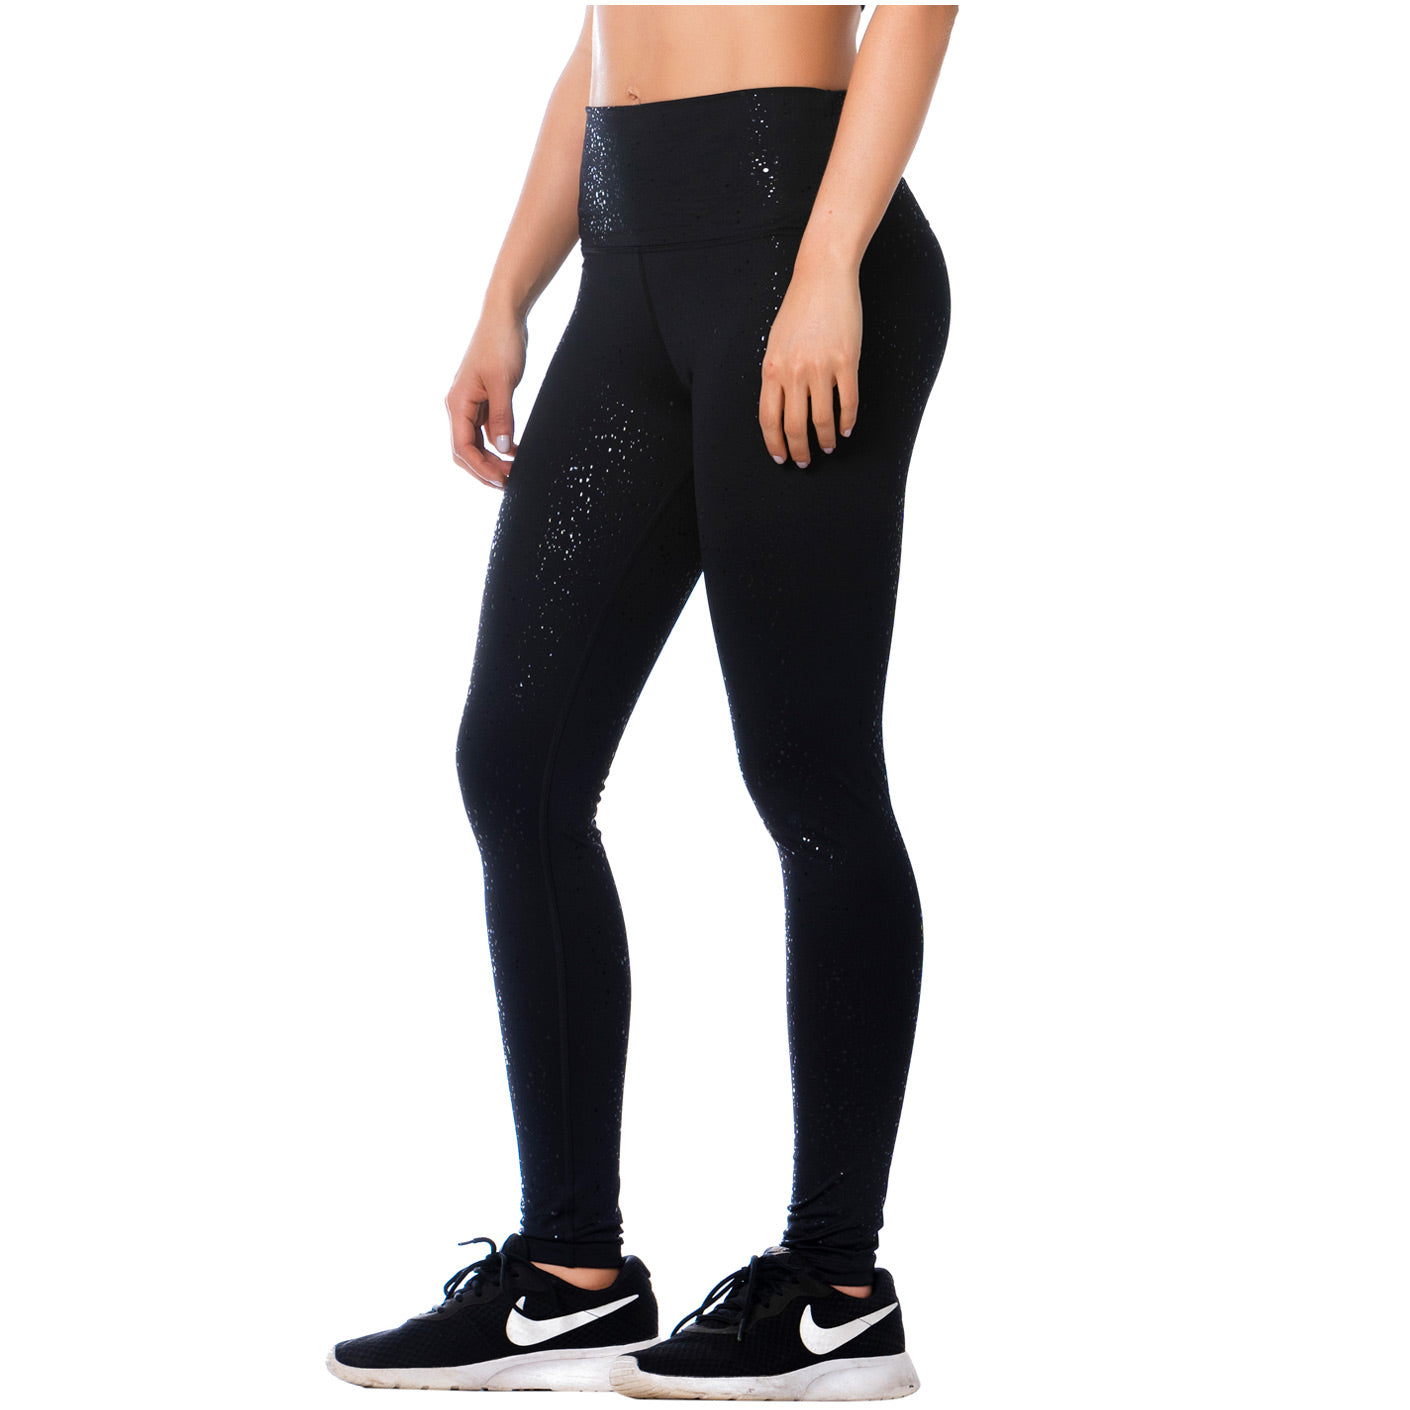 FlexMee 946172 | Colombian High Waisted Leggings for Women in Black | Chica Sexy